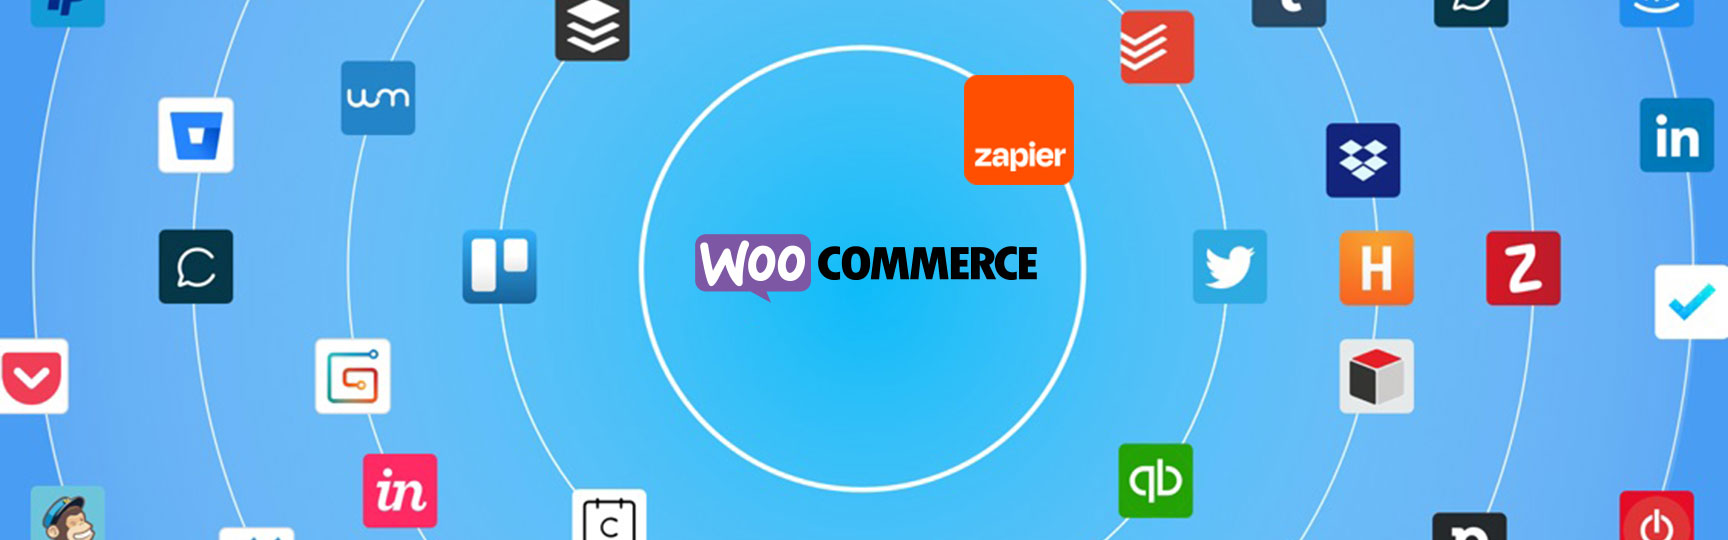 WooCommerce Zapier - WooCommerce Zapier v2.10.1 by Woocommerce Nulled Free Download